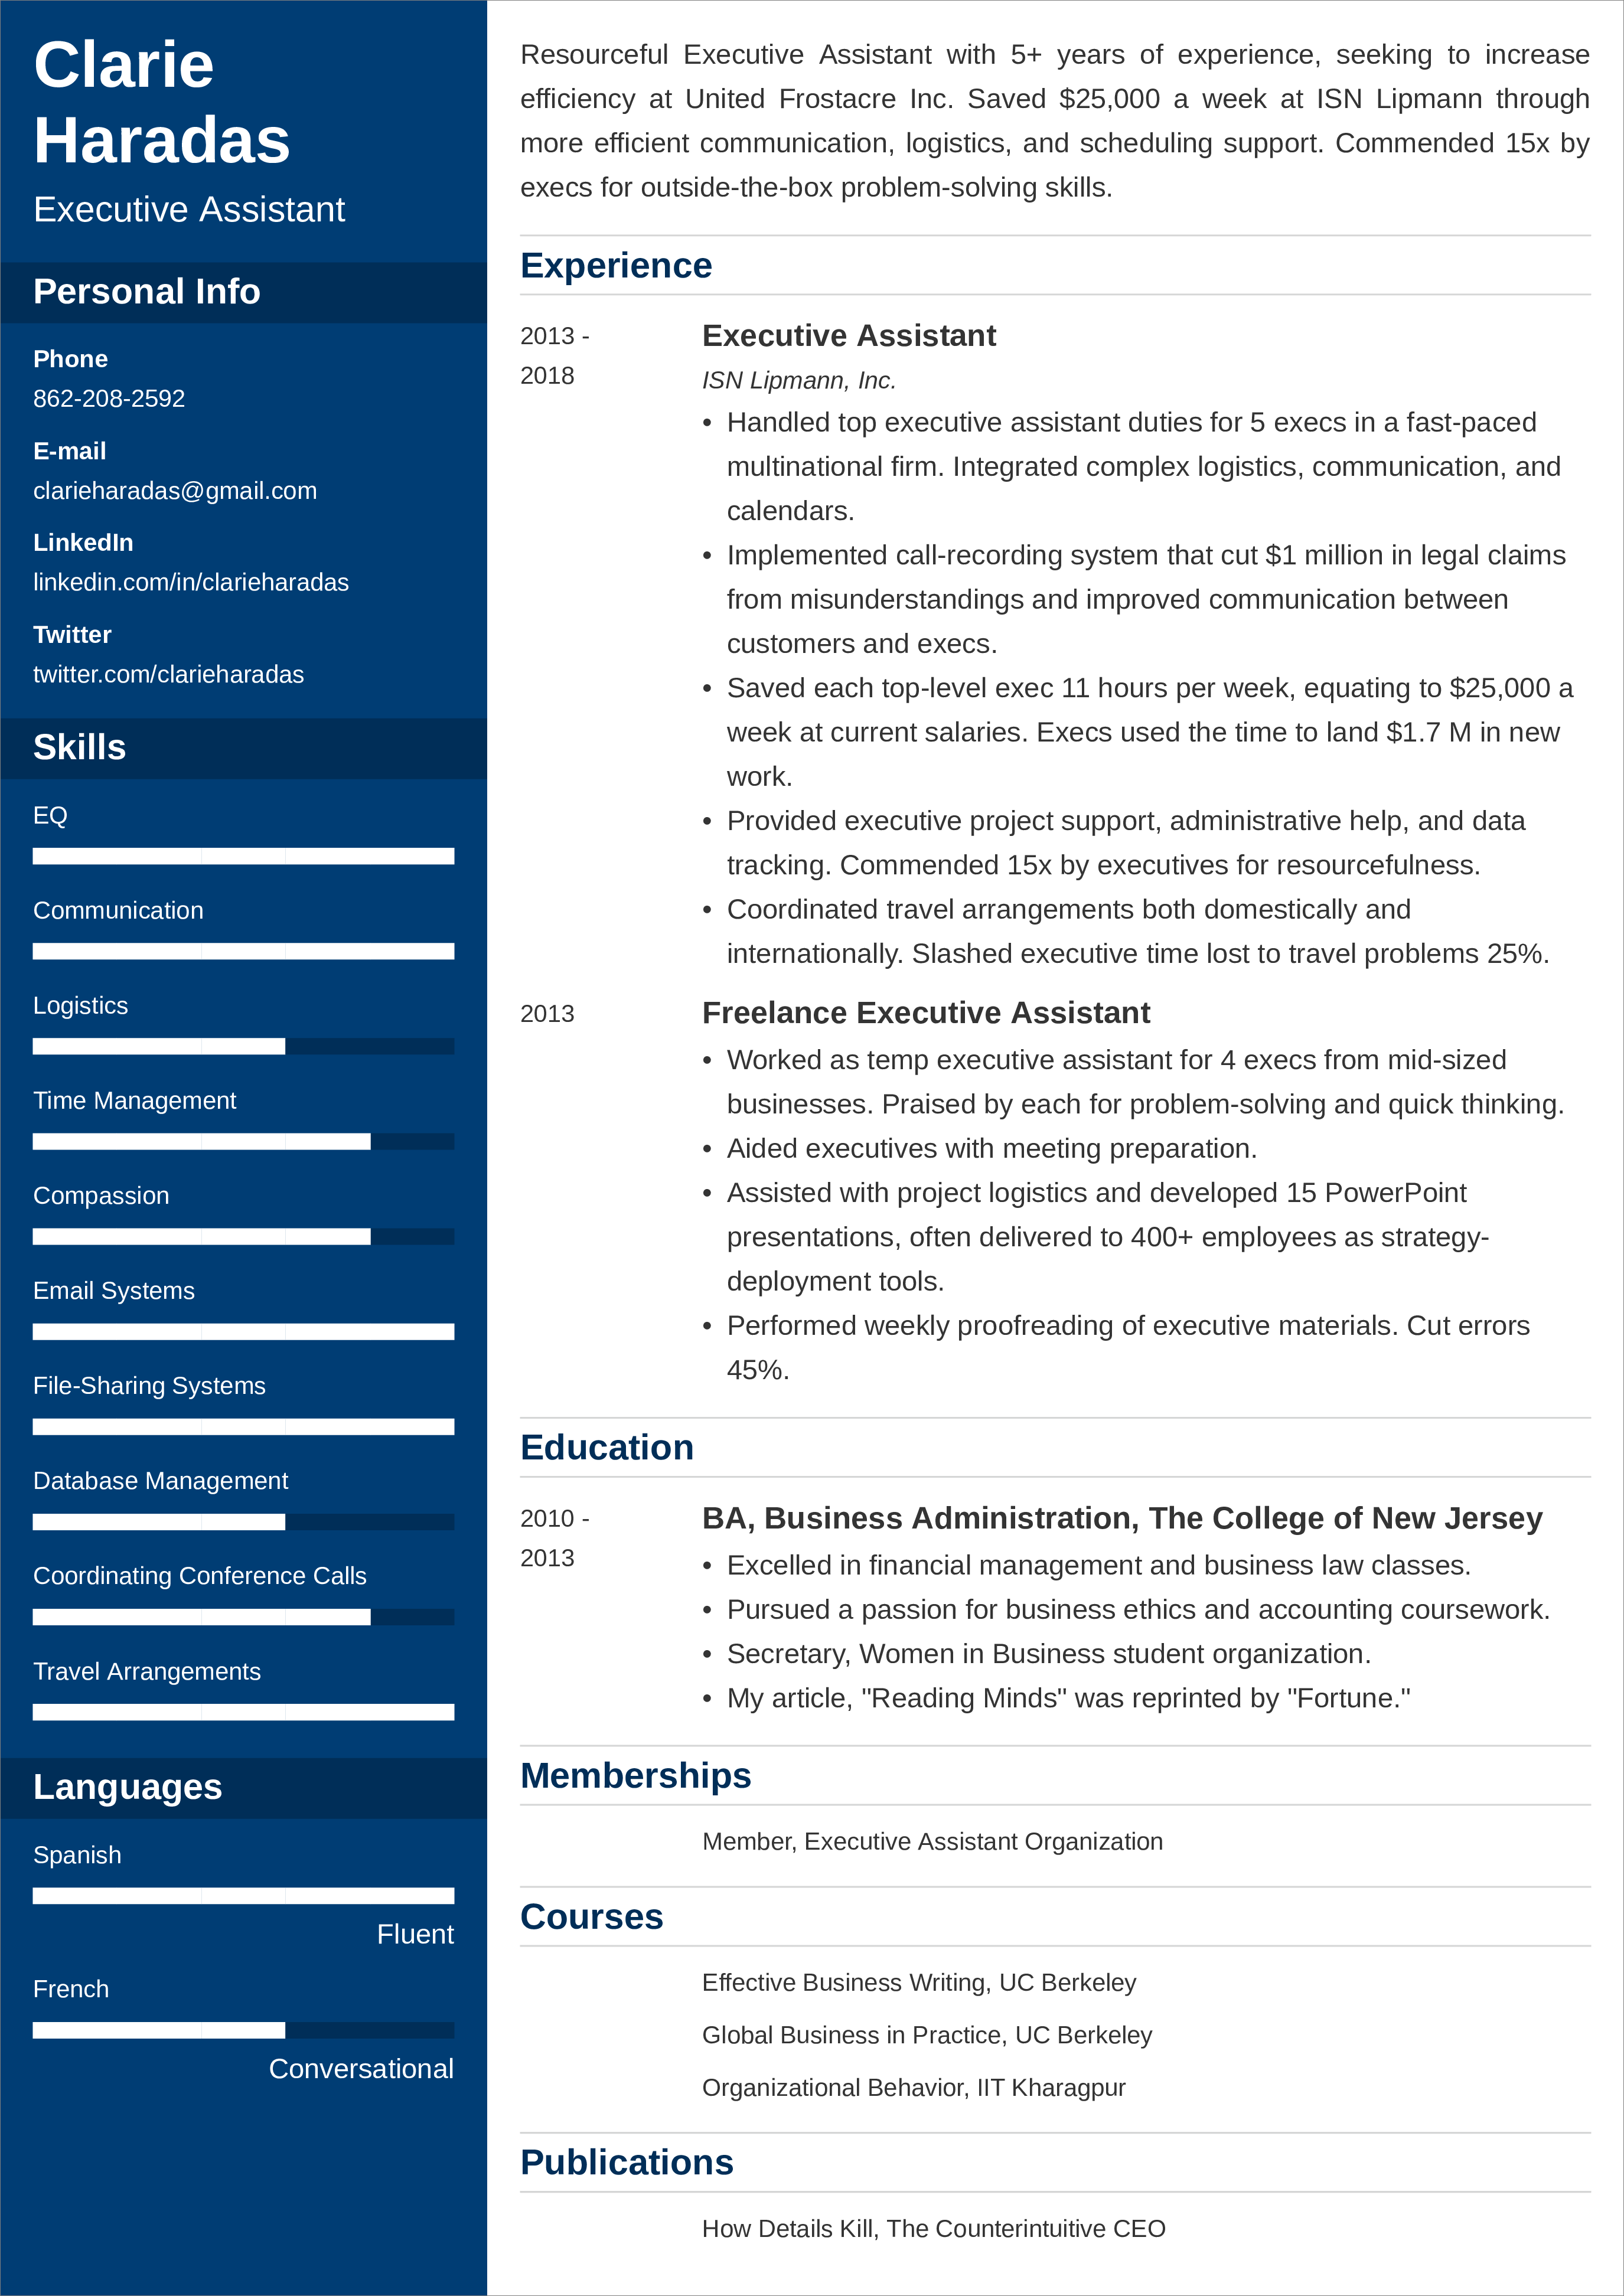 10+ Free Resume Templates for Microsoft Word [10 ready] Throughout Blank Resume Templates For Microsoft Word